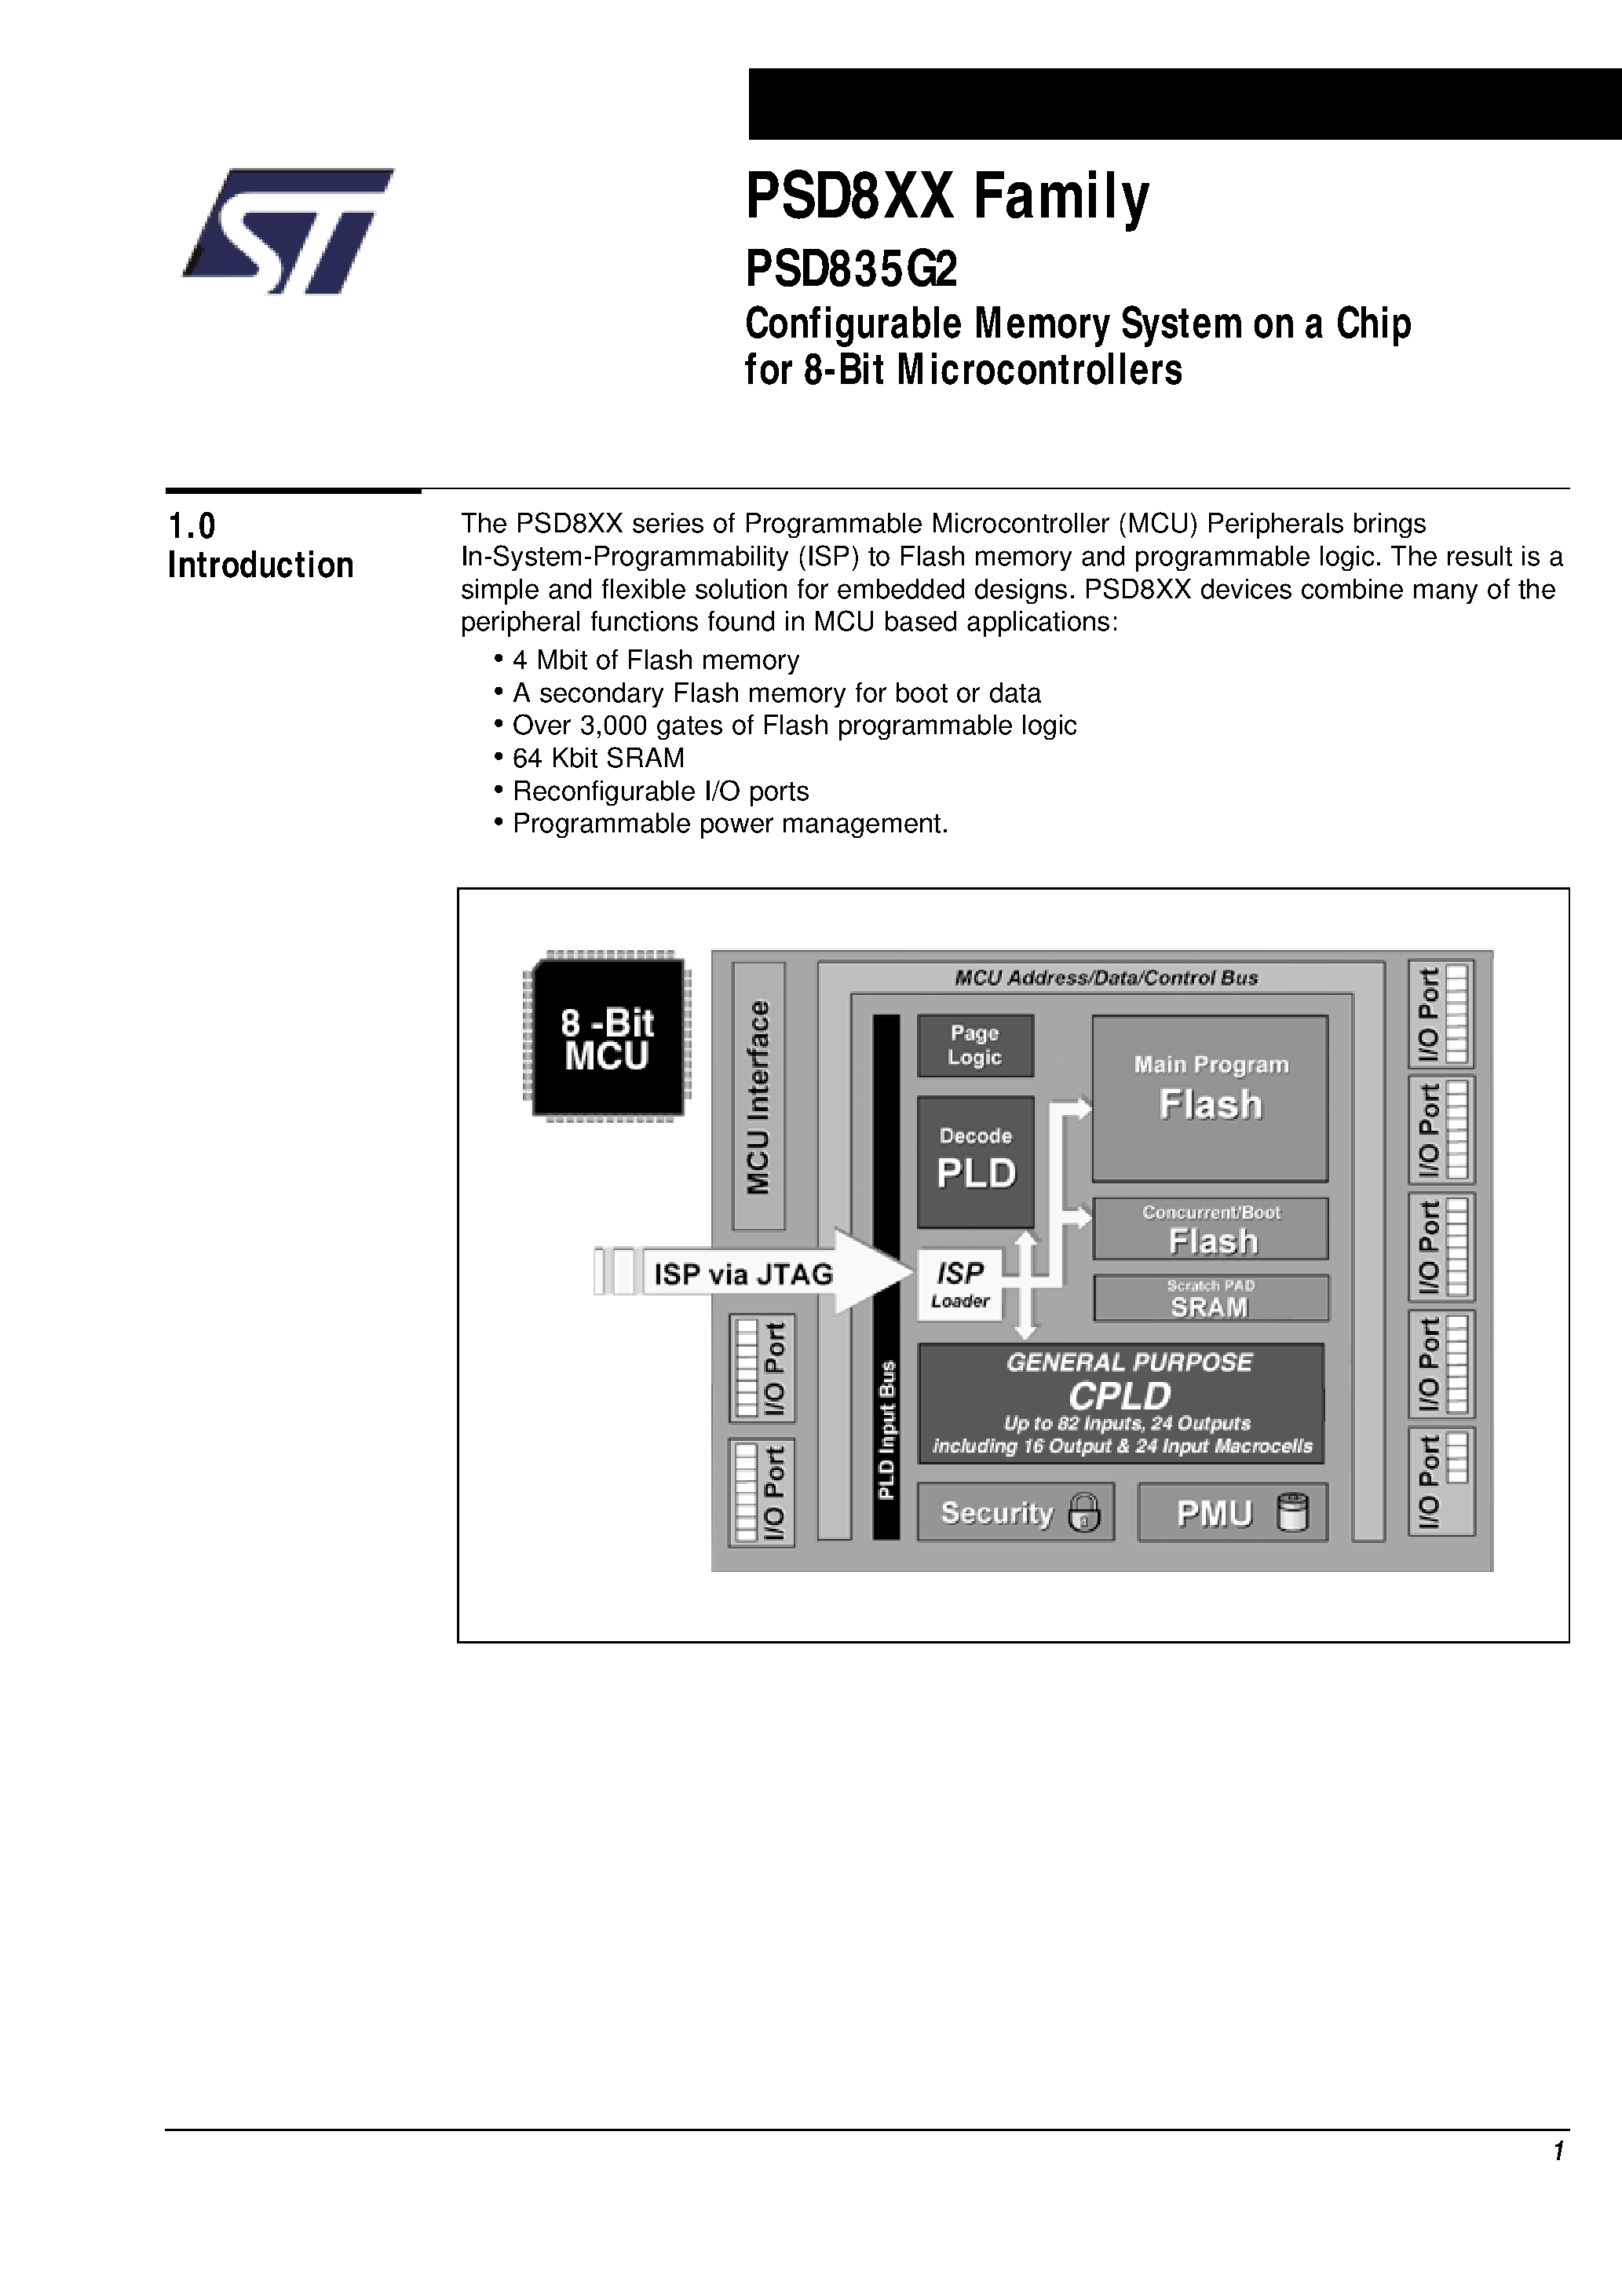 Datasheet PSD835F2-A-15U - Configurable Memory System on a Chip for 8-Bit Microcontrollers page 2